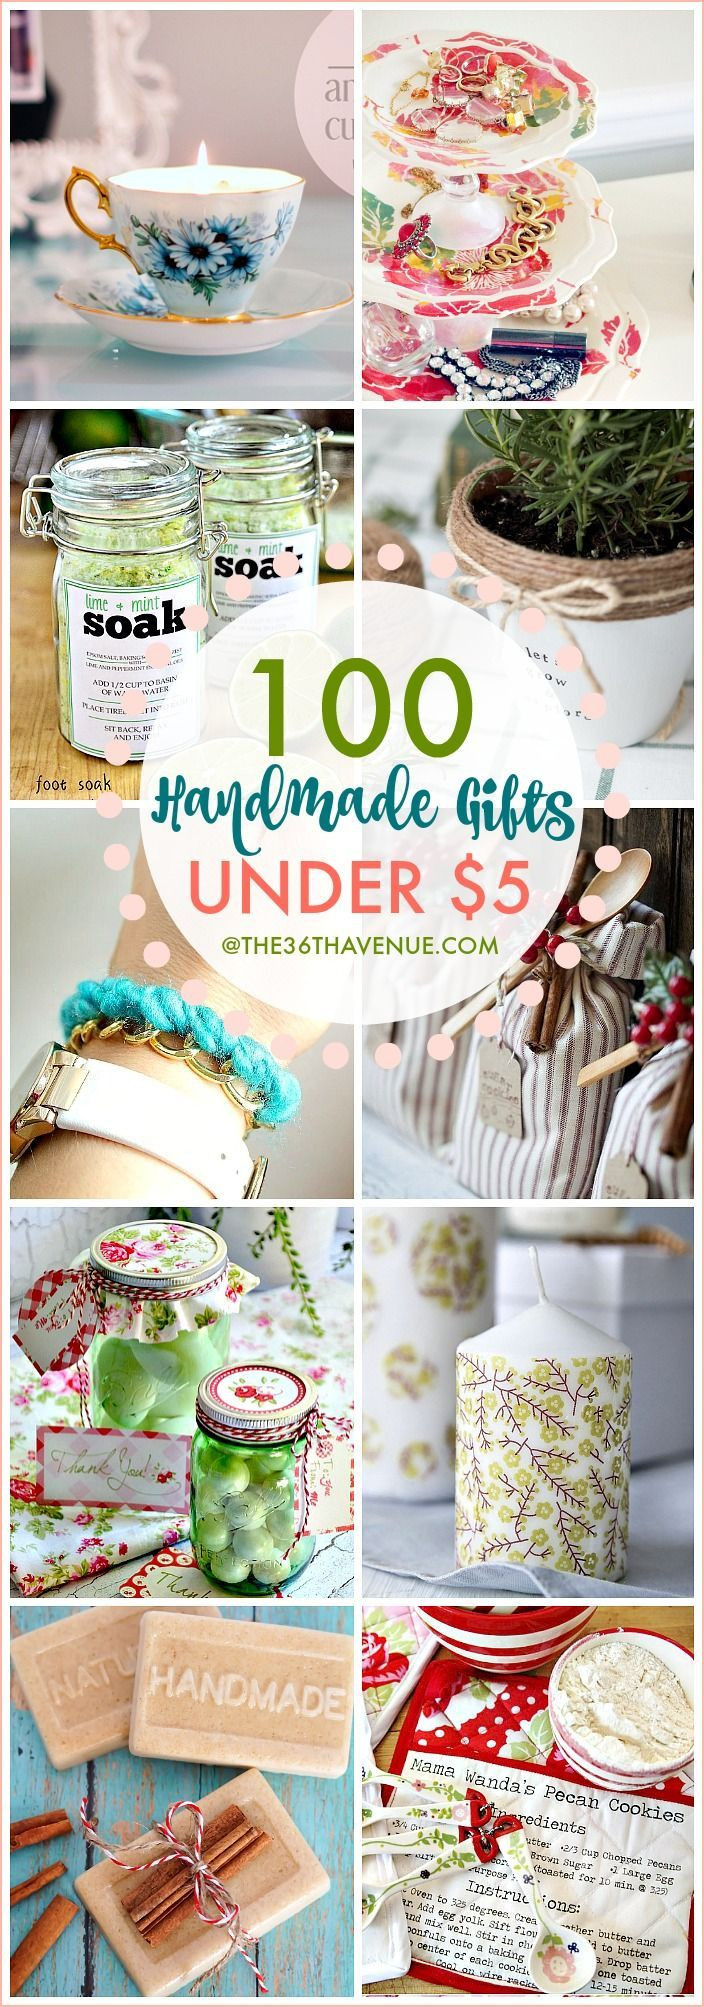 Christmas Gift Ideas Under $5
 Gifts under $5